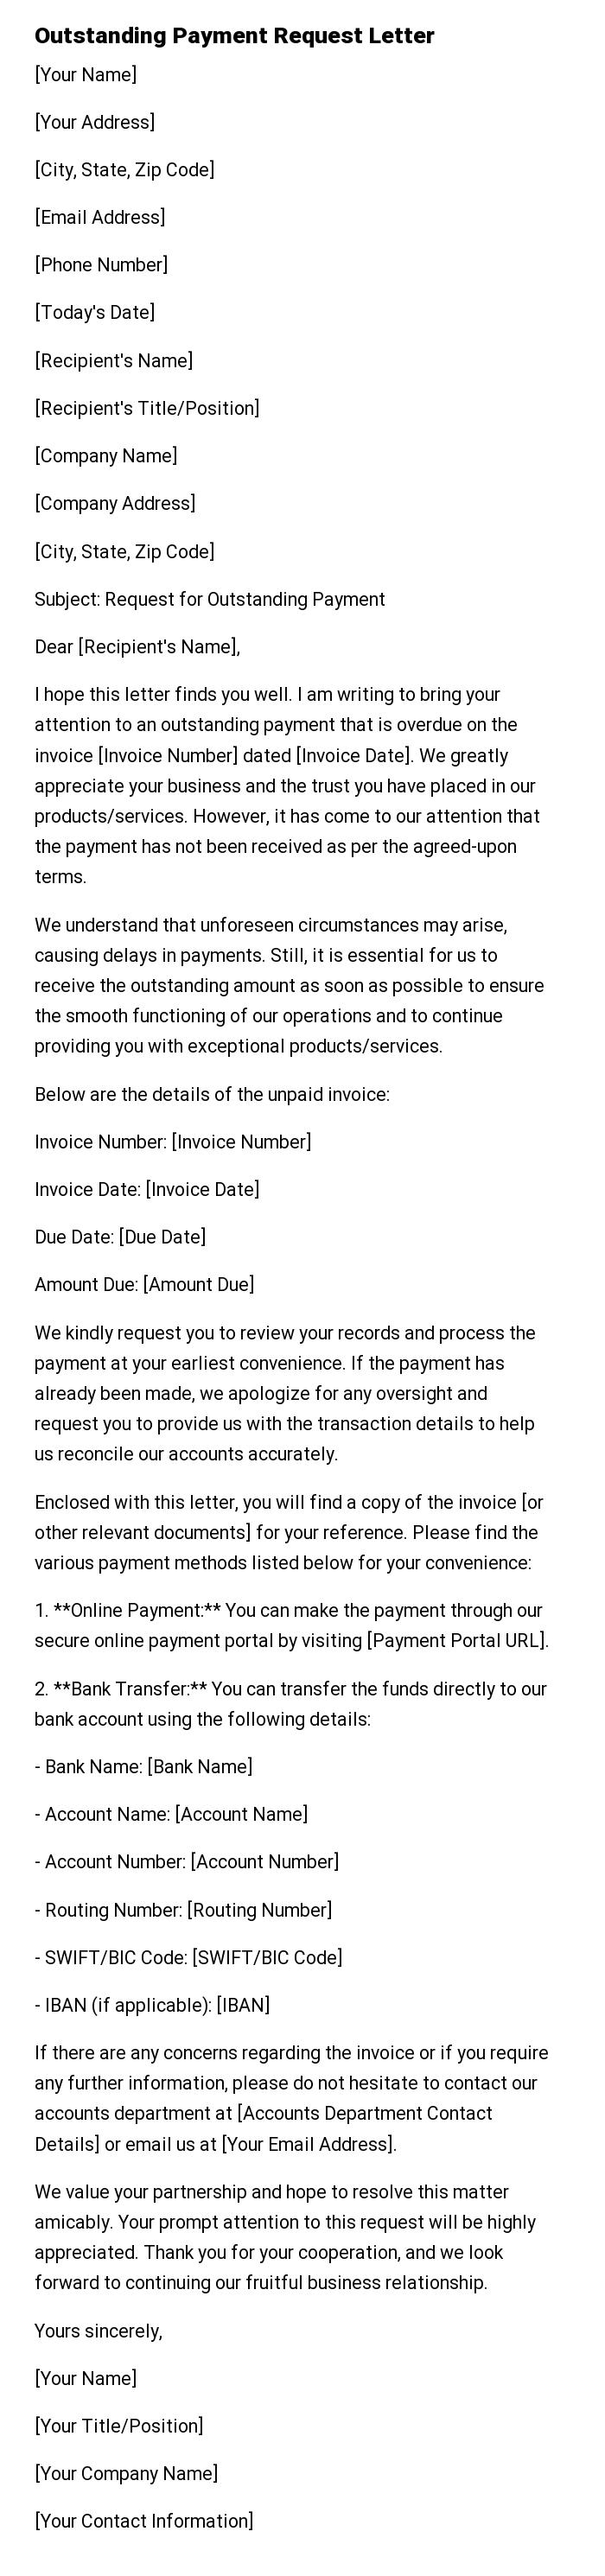 Outstanding Payment Request Letter